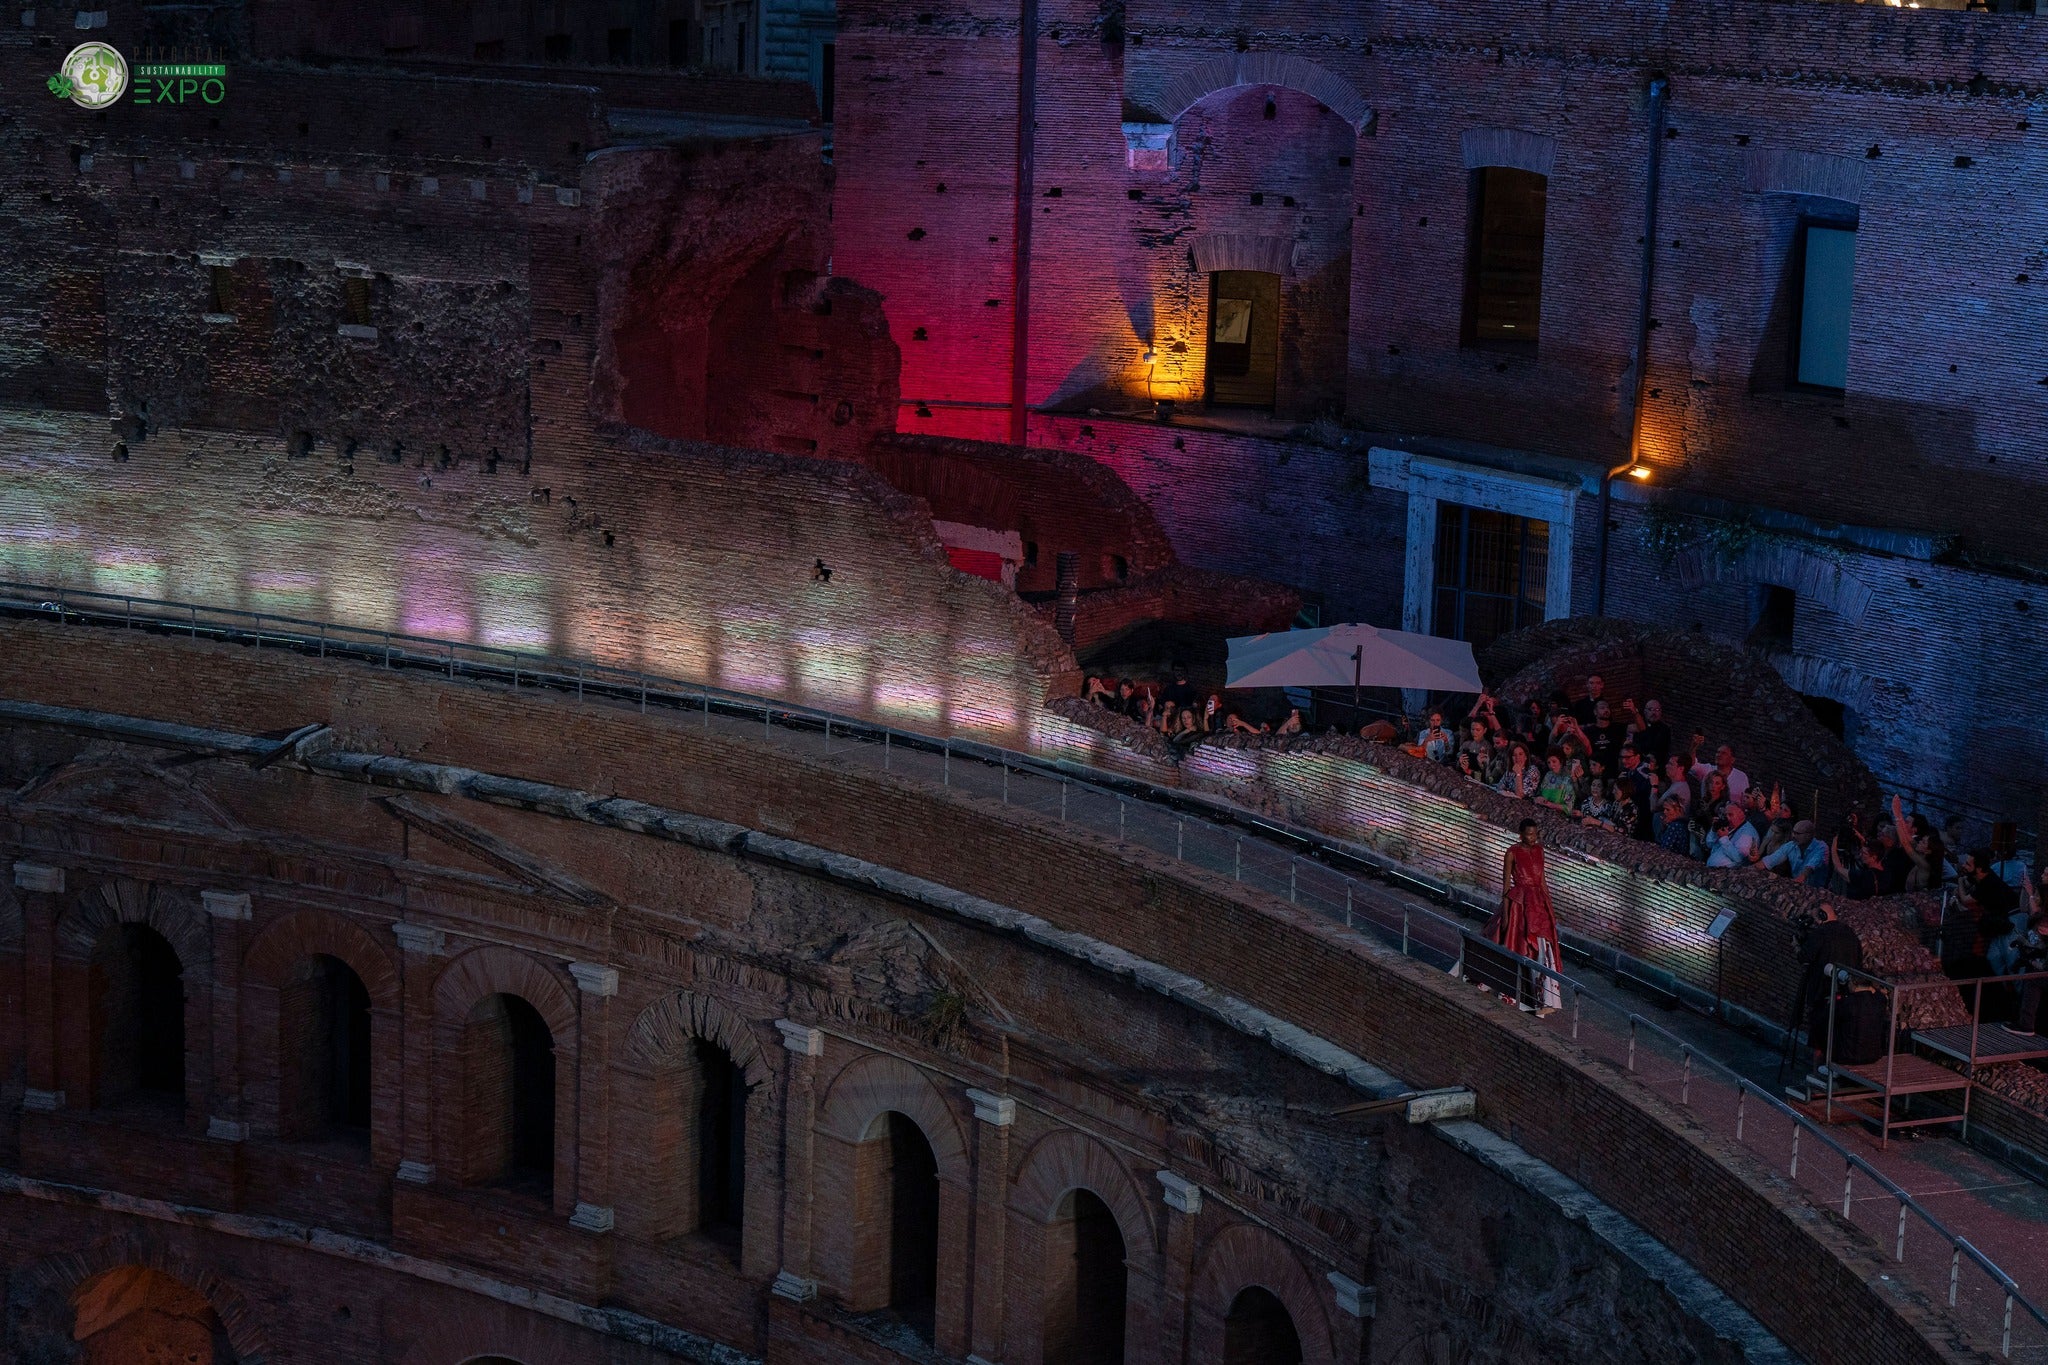 Benedetti Life Unveils Sustainable and Appleskin Haute Couture Dress at the Spectacular Archaeological Complex of Mercati di Traiano in Rome